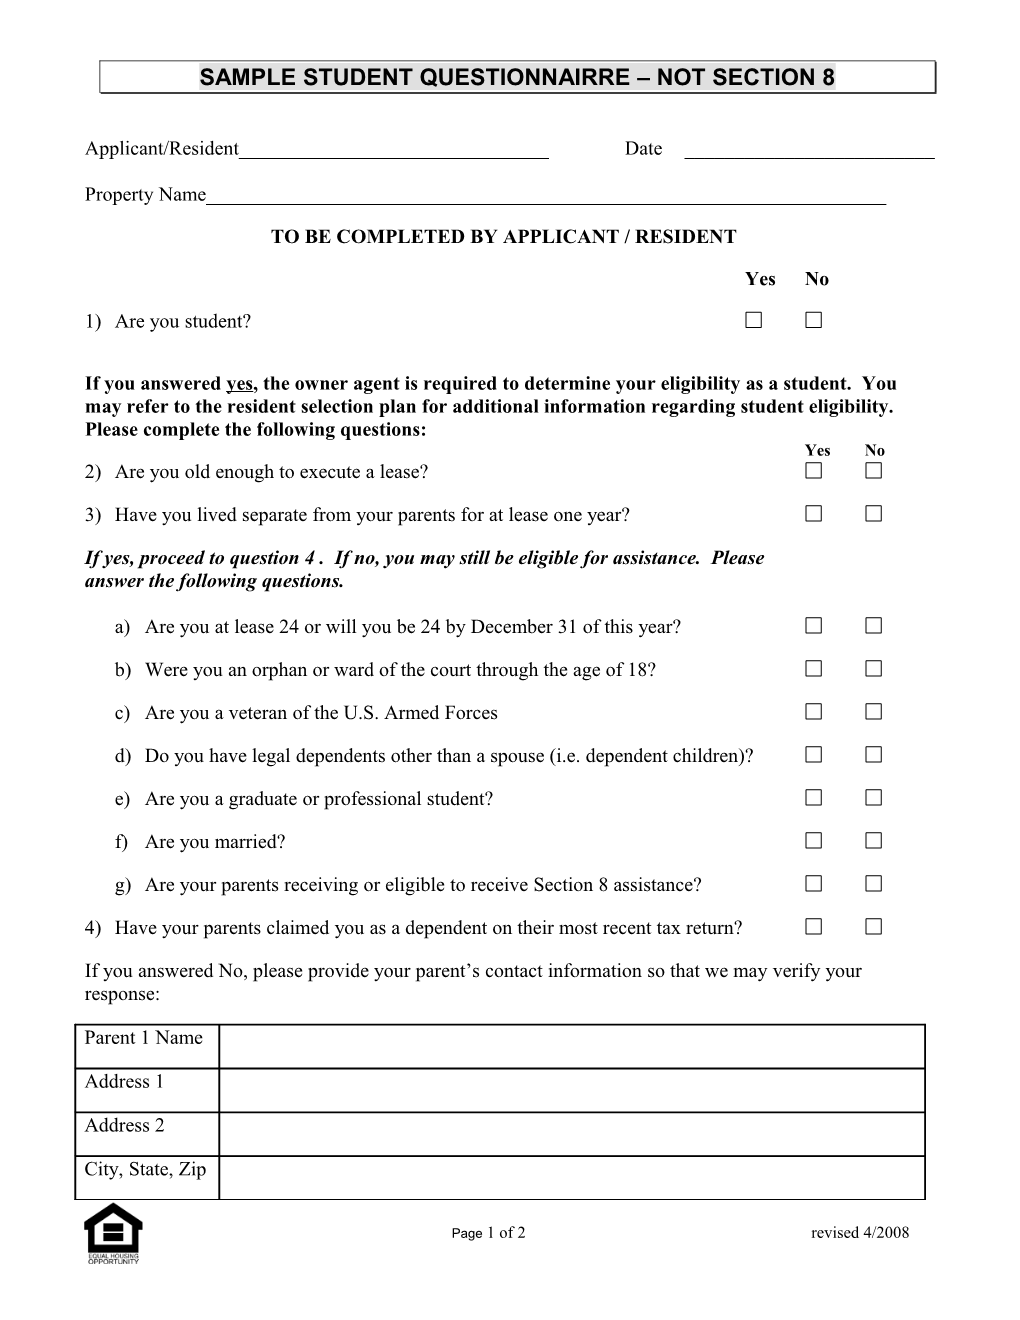 Sample Student Questionnairre Not Section 8